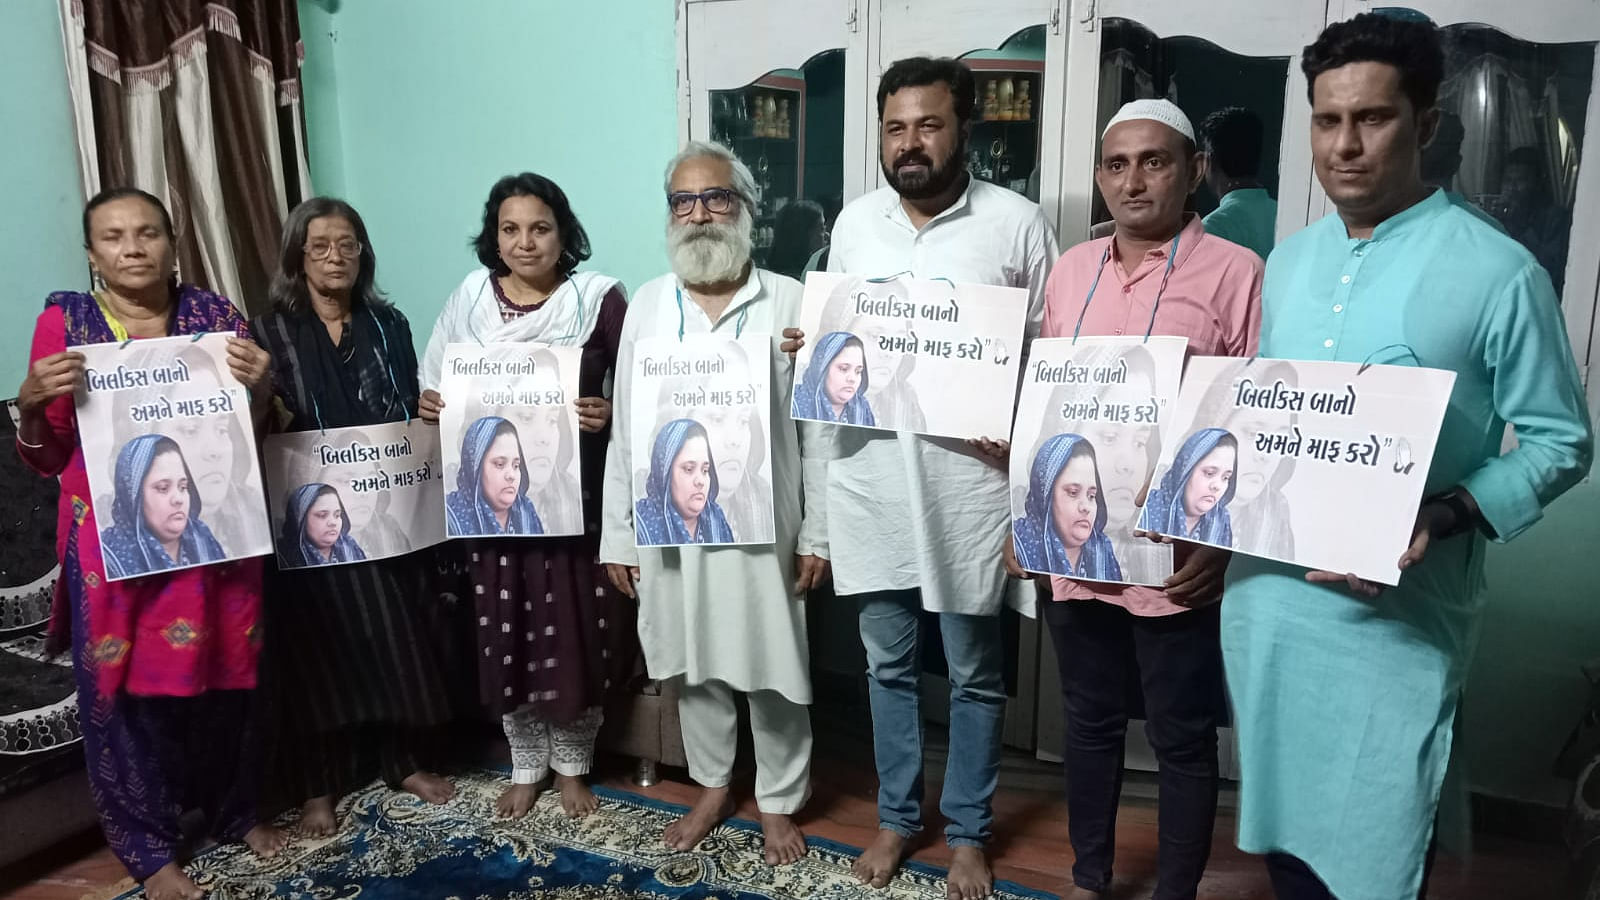 Activists expressing their solidarity with Bilkis Bano before they were detained in Godhra. Credit: Special arrangement 